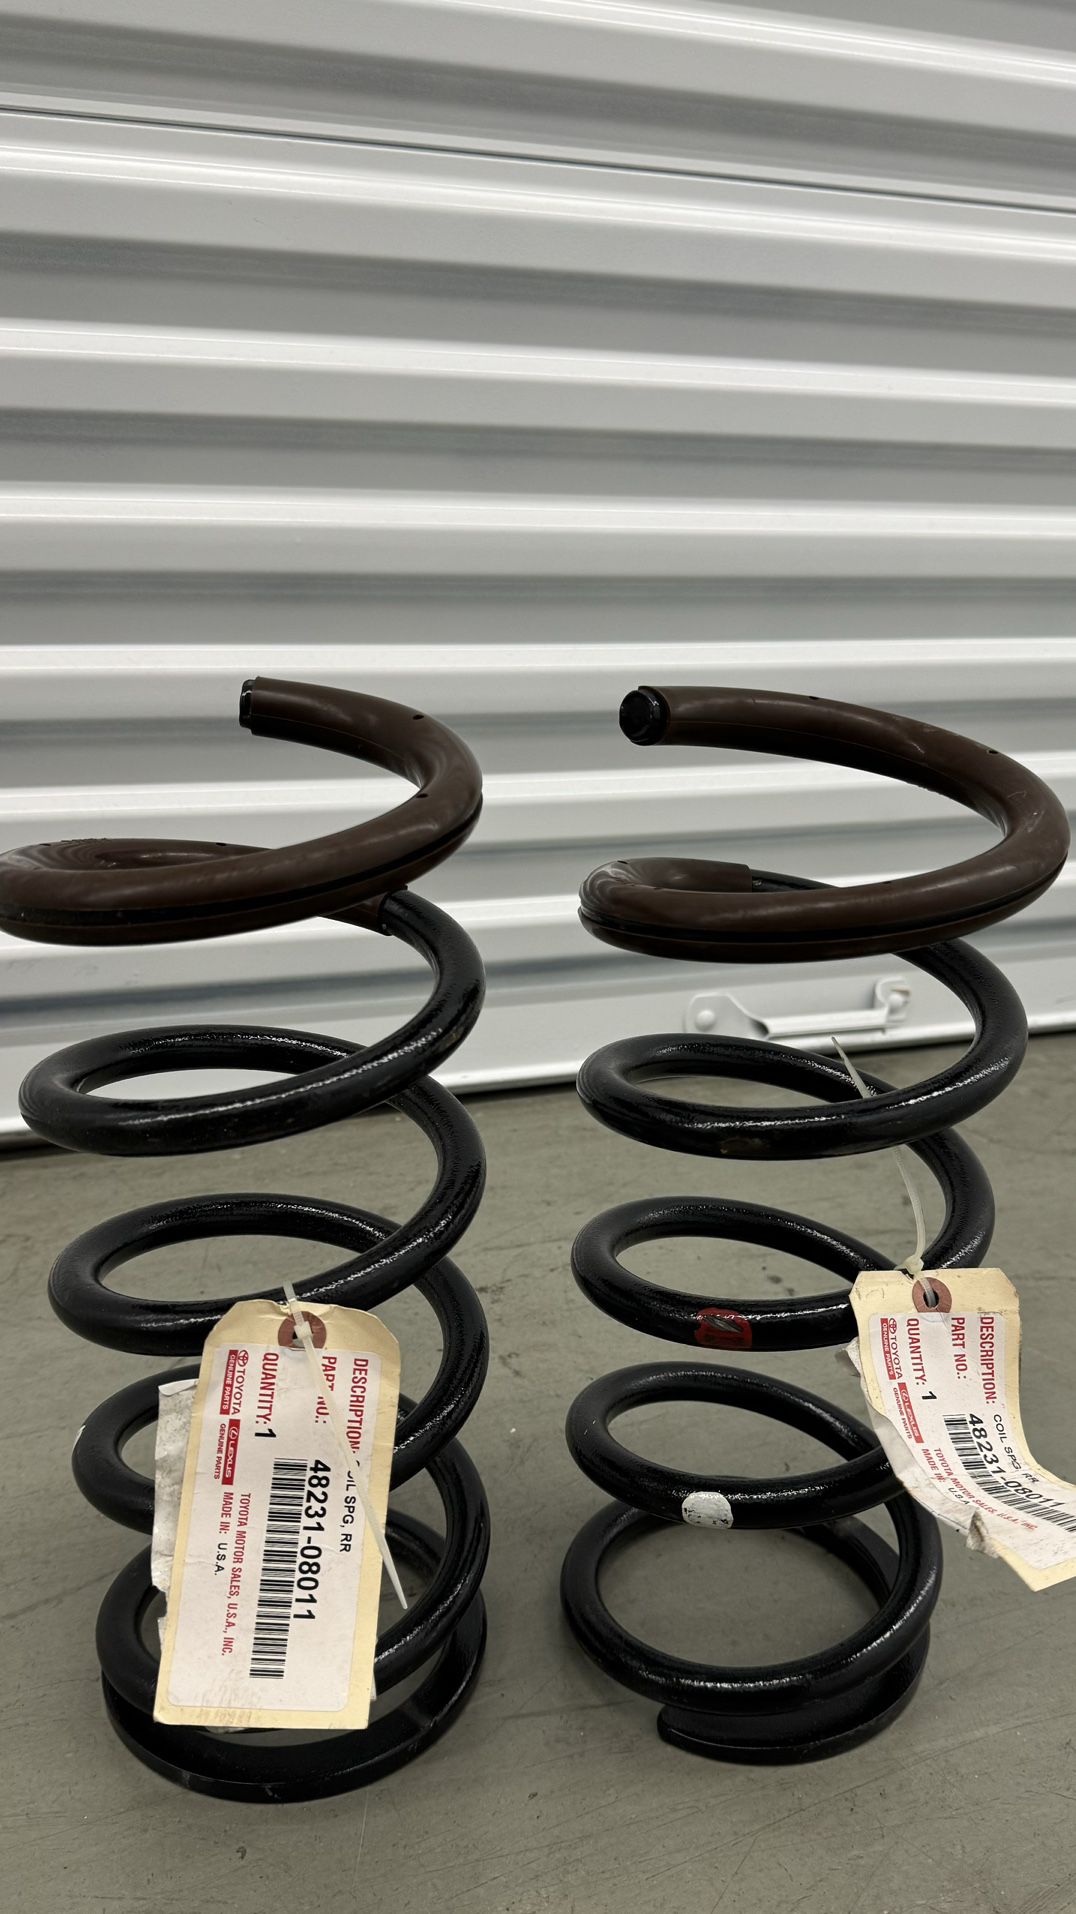 Genuine OEM Toyota 48(contact info removed)1 Rear Coil Spring 2011-2014 Sienna